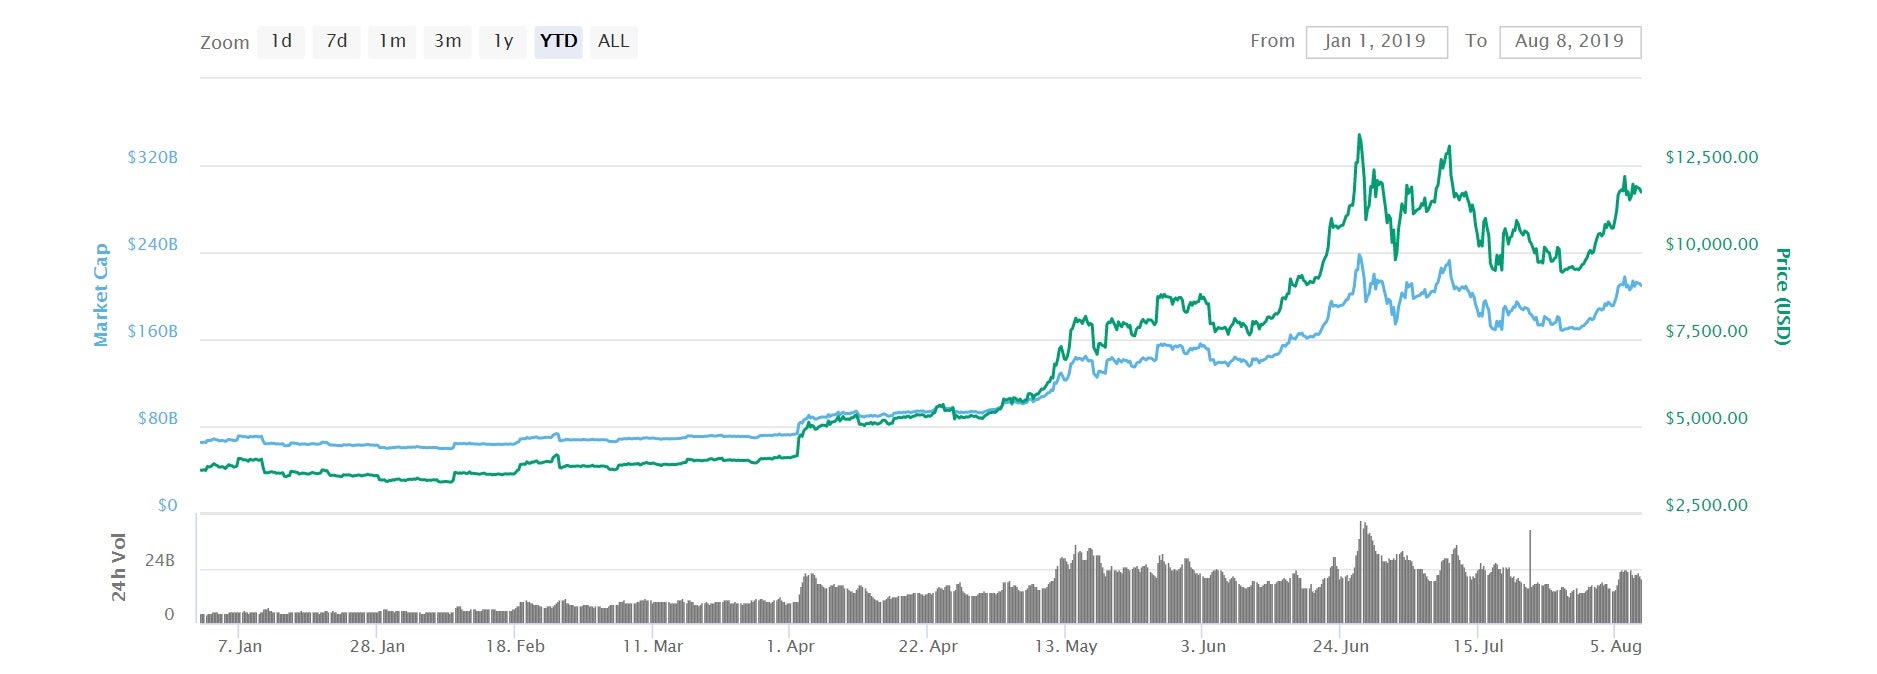 Bitcoin’s value has risen from around $3,000 to $12,000 in 2019